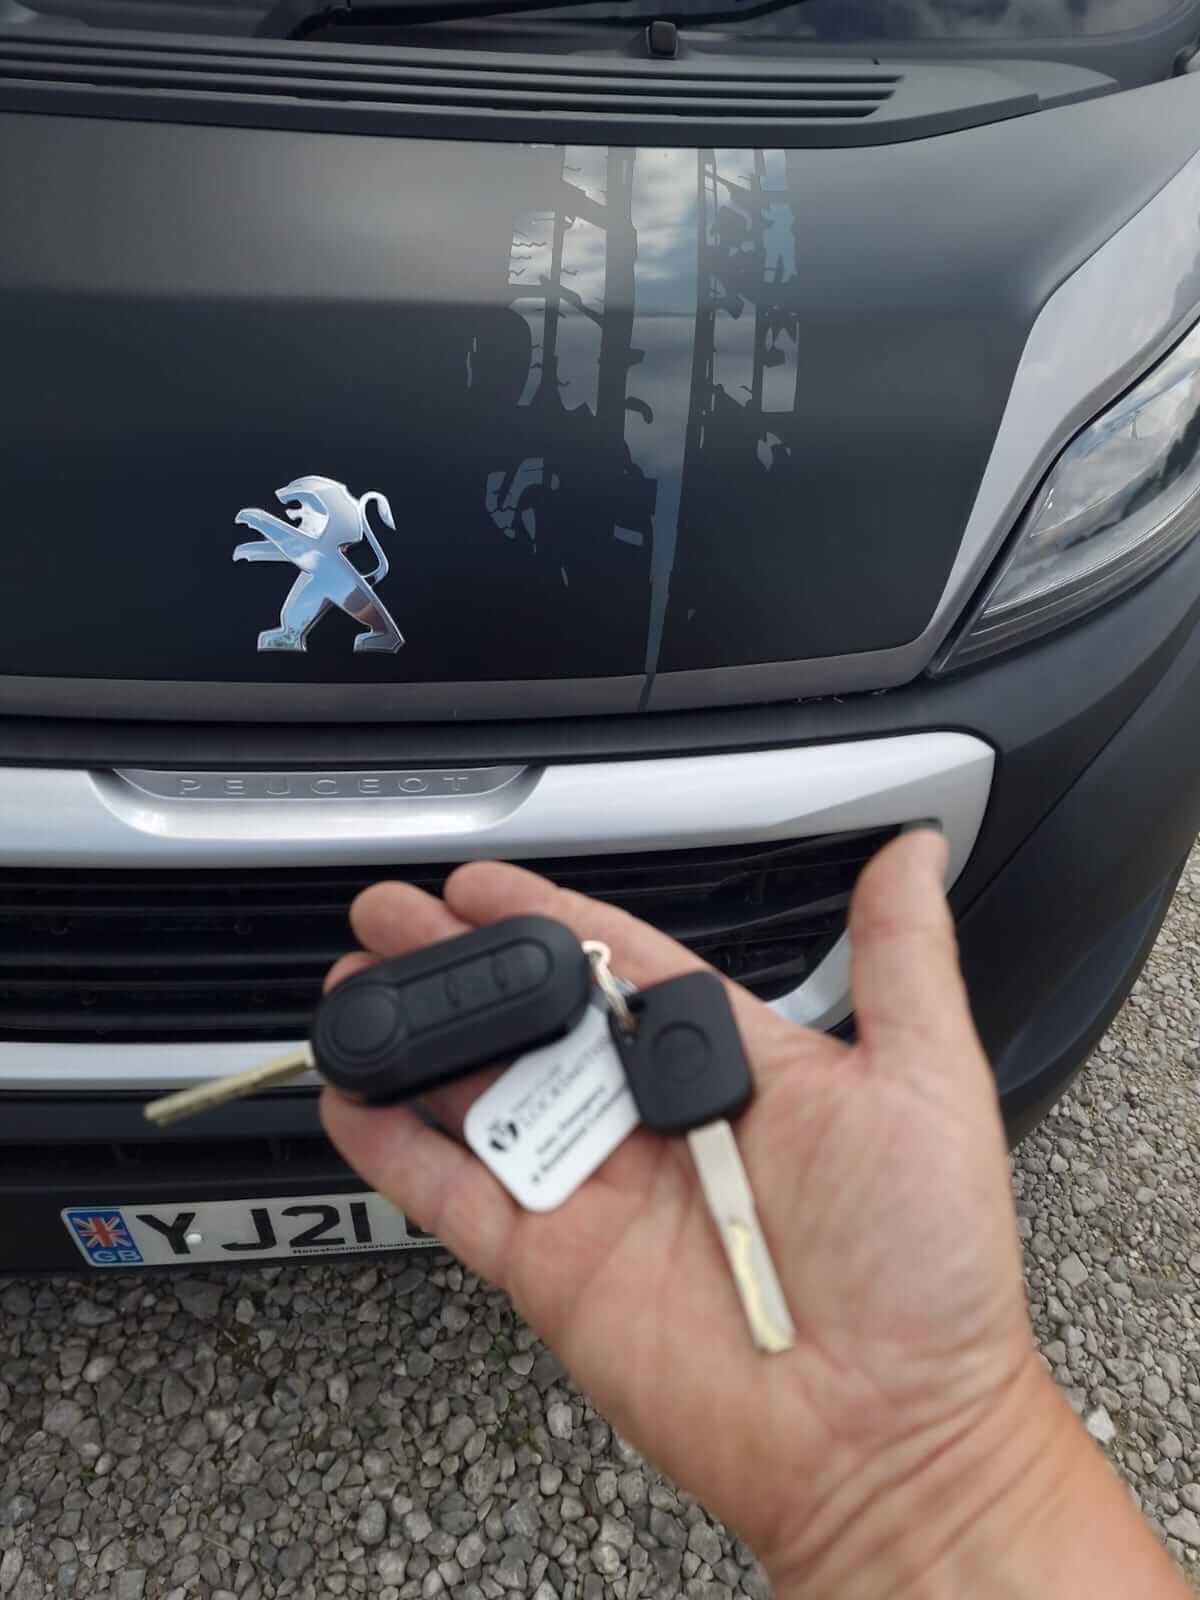 new key fob replacement for a Peugeot